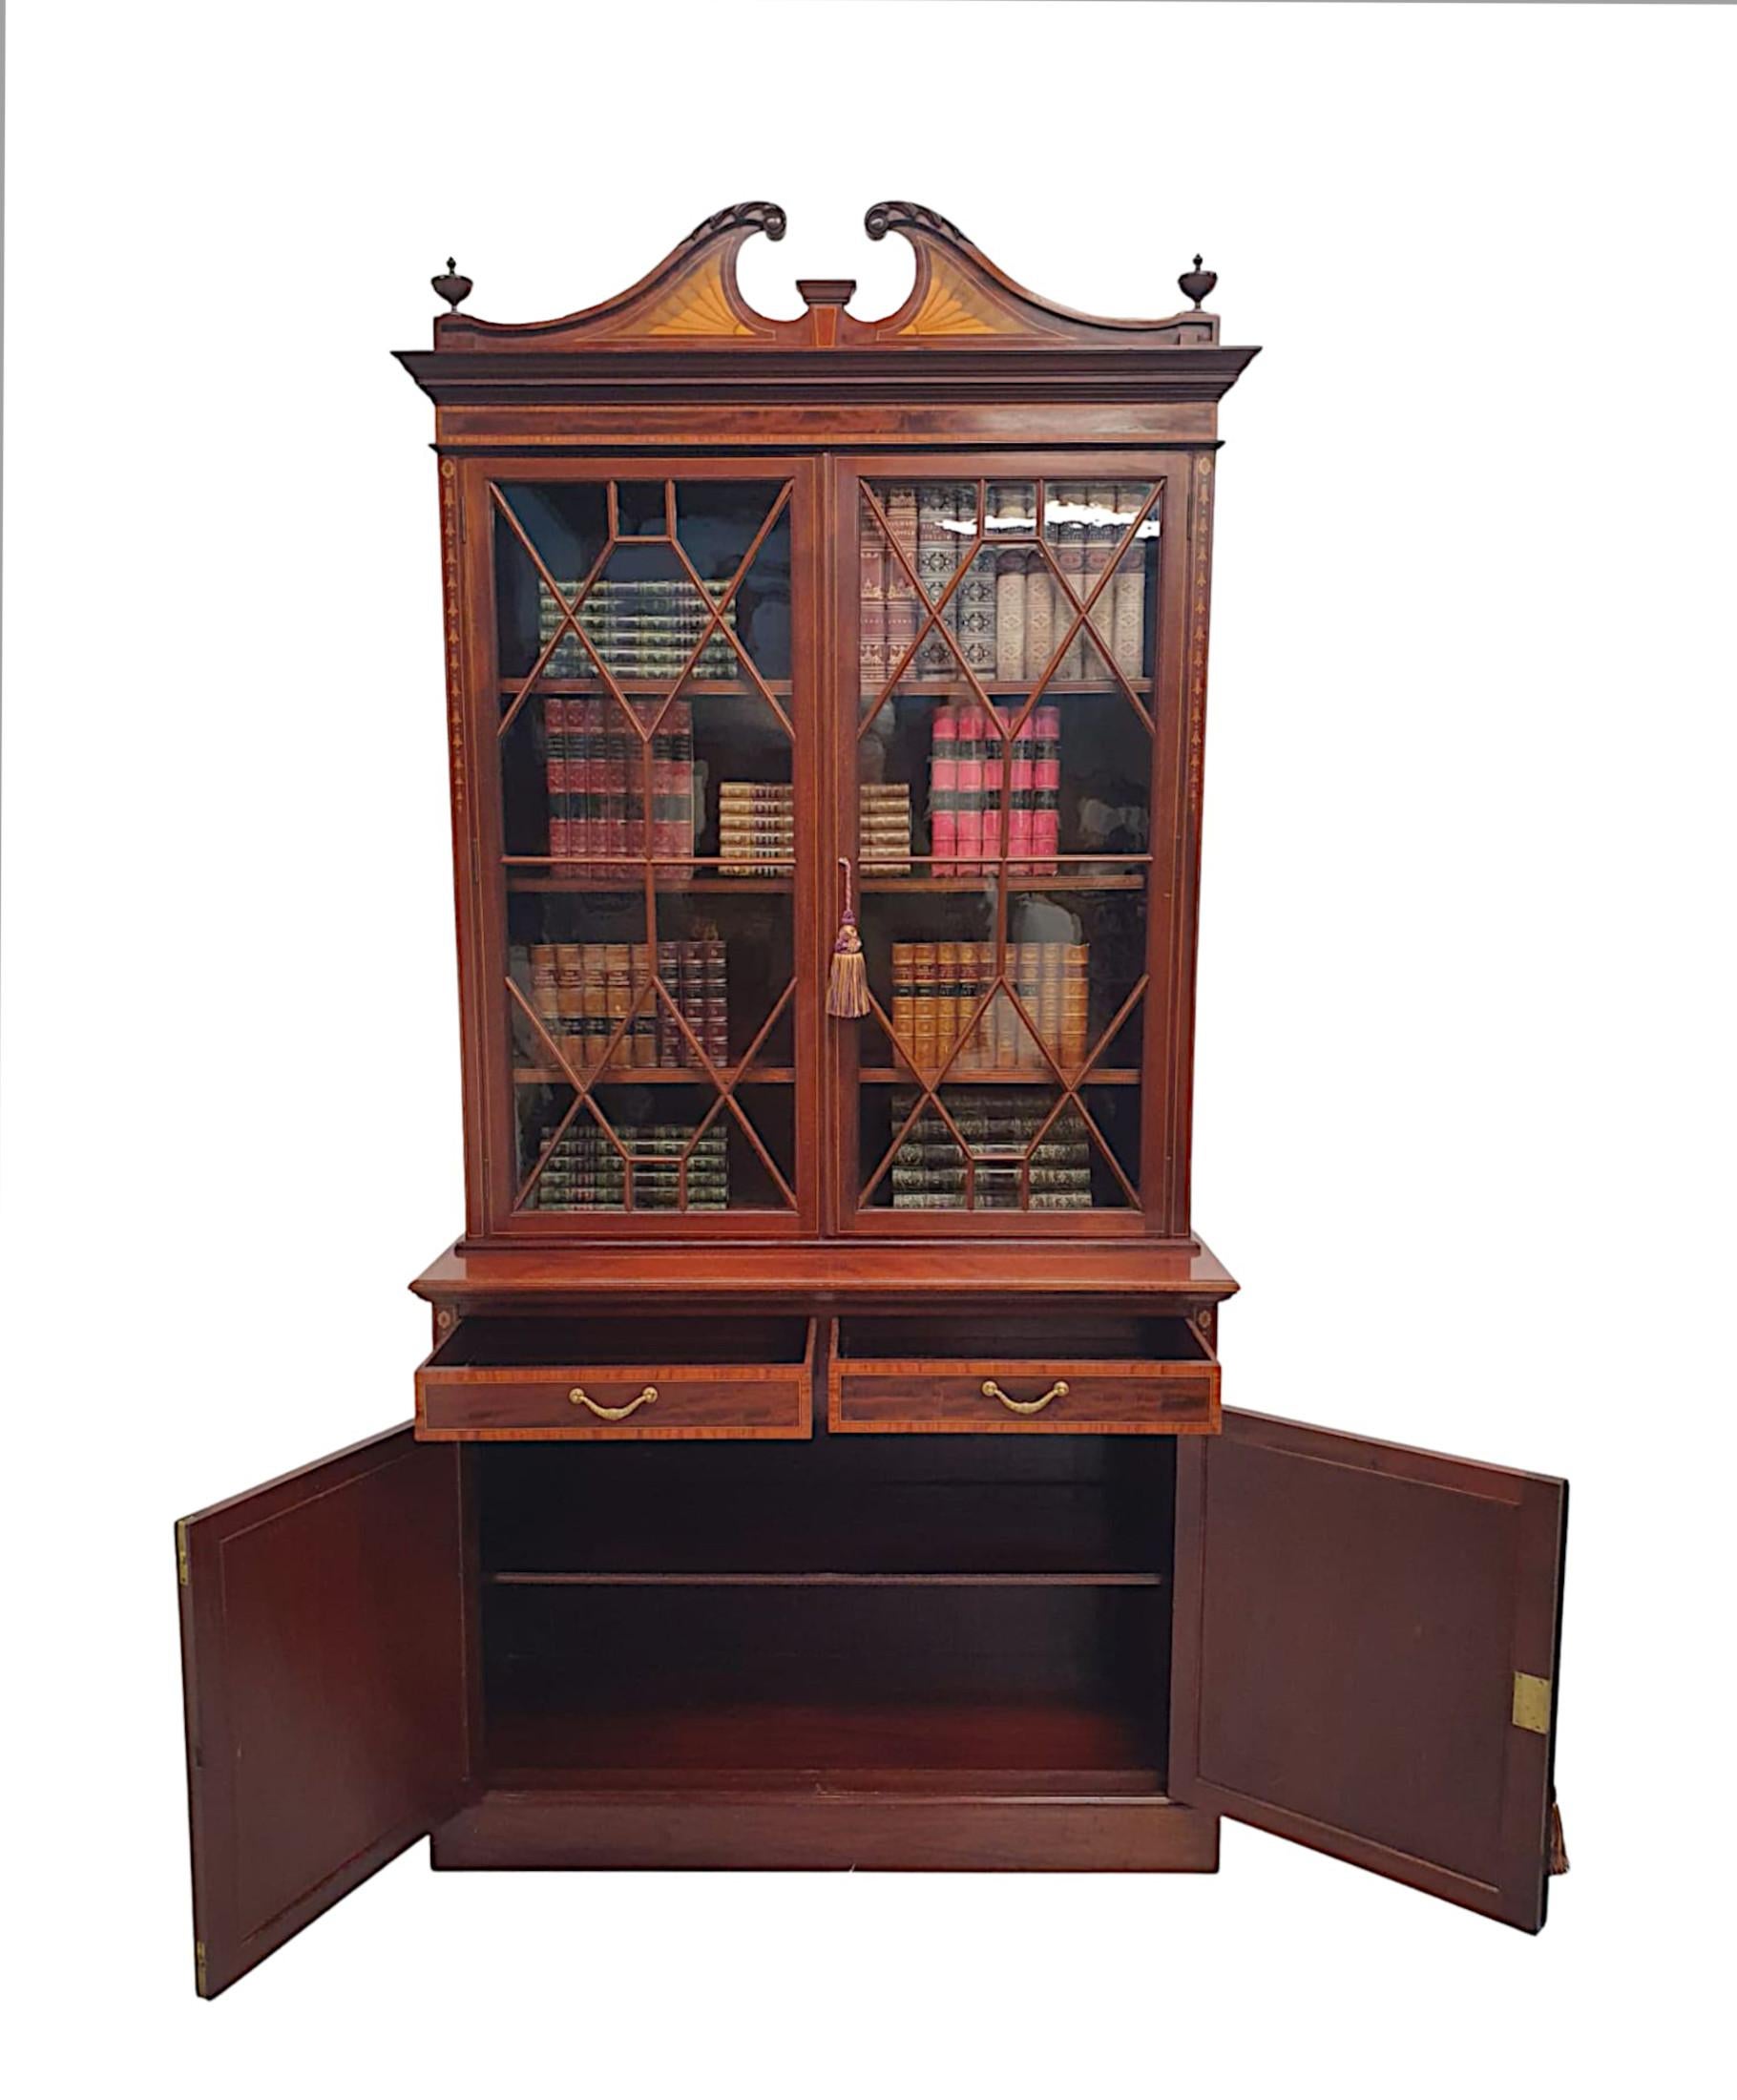 A stunning Edwardian mahogany two door bookcase, of fabulous quality, finely carved with rich patination, fine grain, line inlaid and crossbanded with fabulous marquetry detail throughout. The broken swan neck pediment gorgeous scrolling acanthus